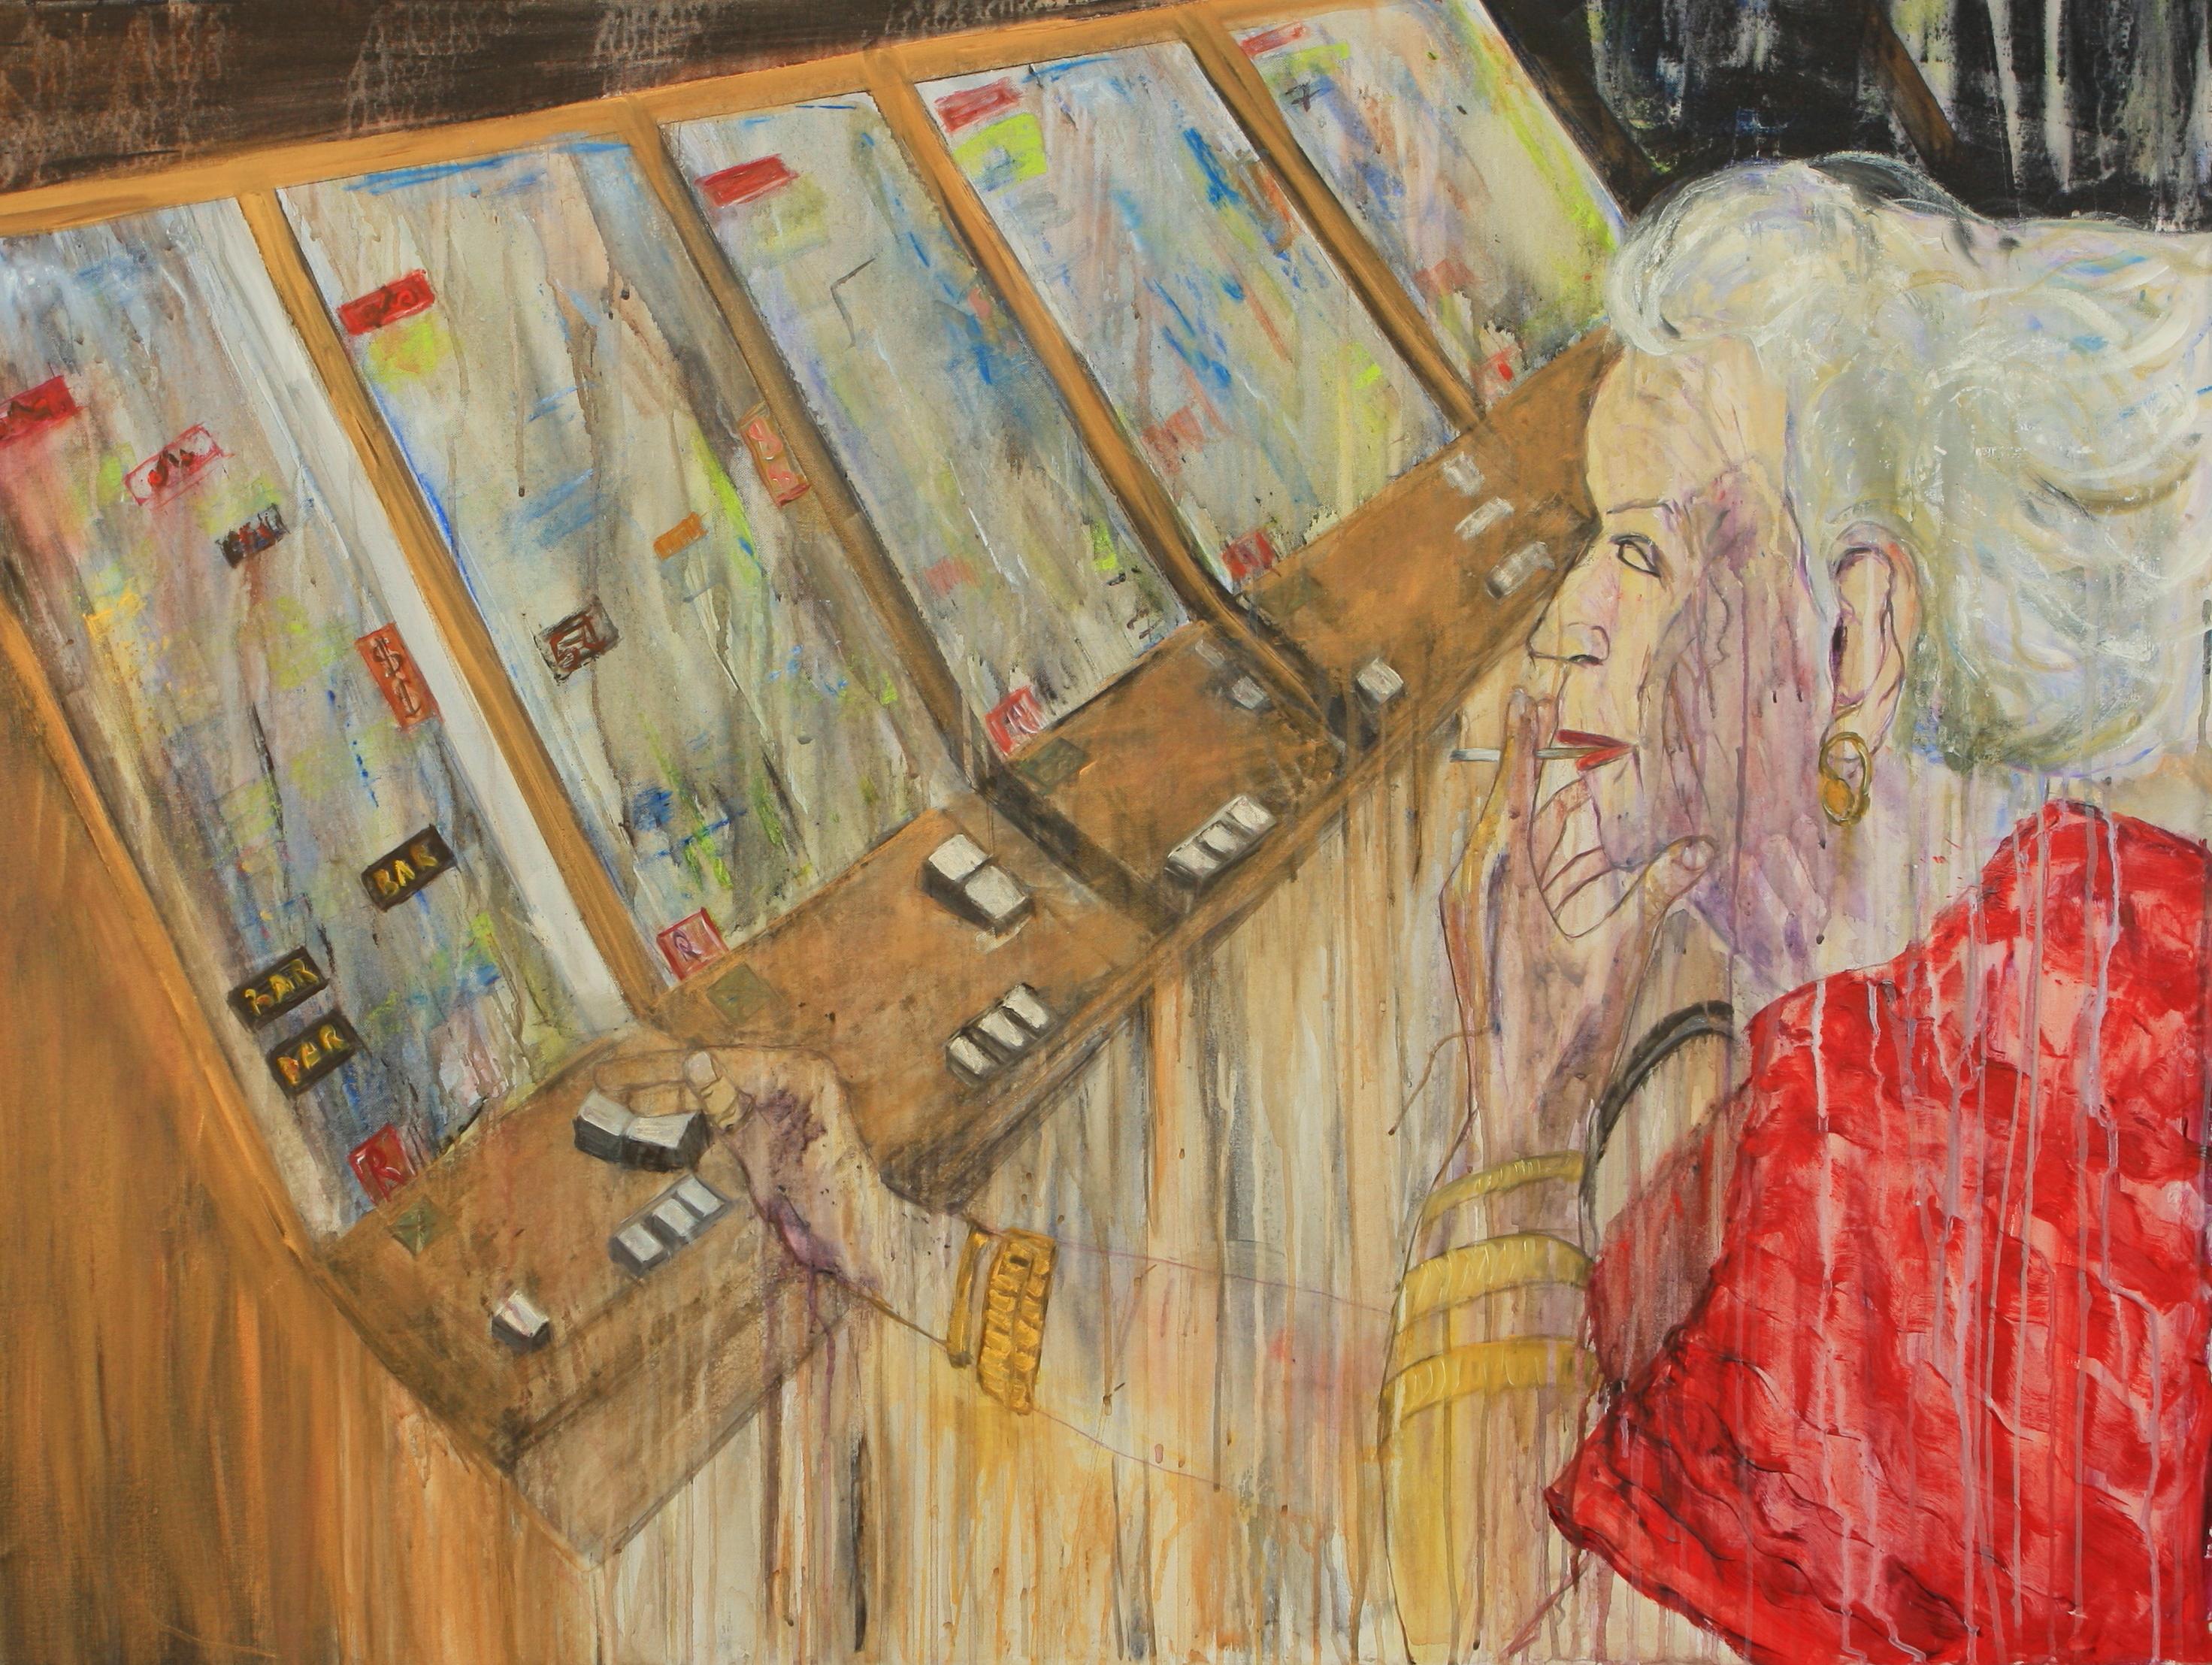 ABOUT THE ARTWORK
The painting depicts an old woman sitting at a slot machine, her face showing the signs of age and weariness. With a cigarette in her hand, she sits there aimlessly, lost in the world of the slot machine, hoping for a momentary